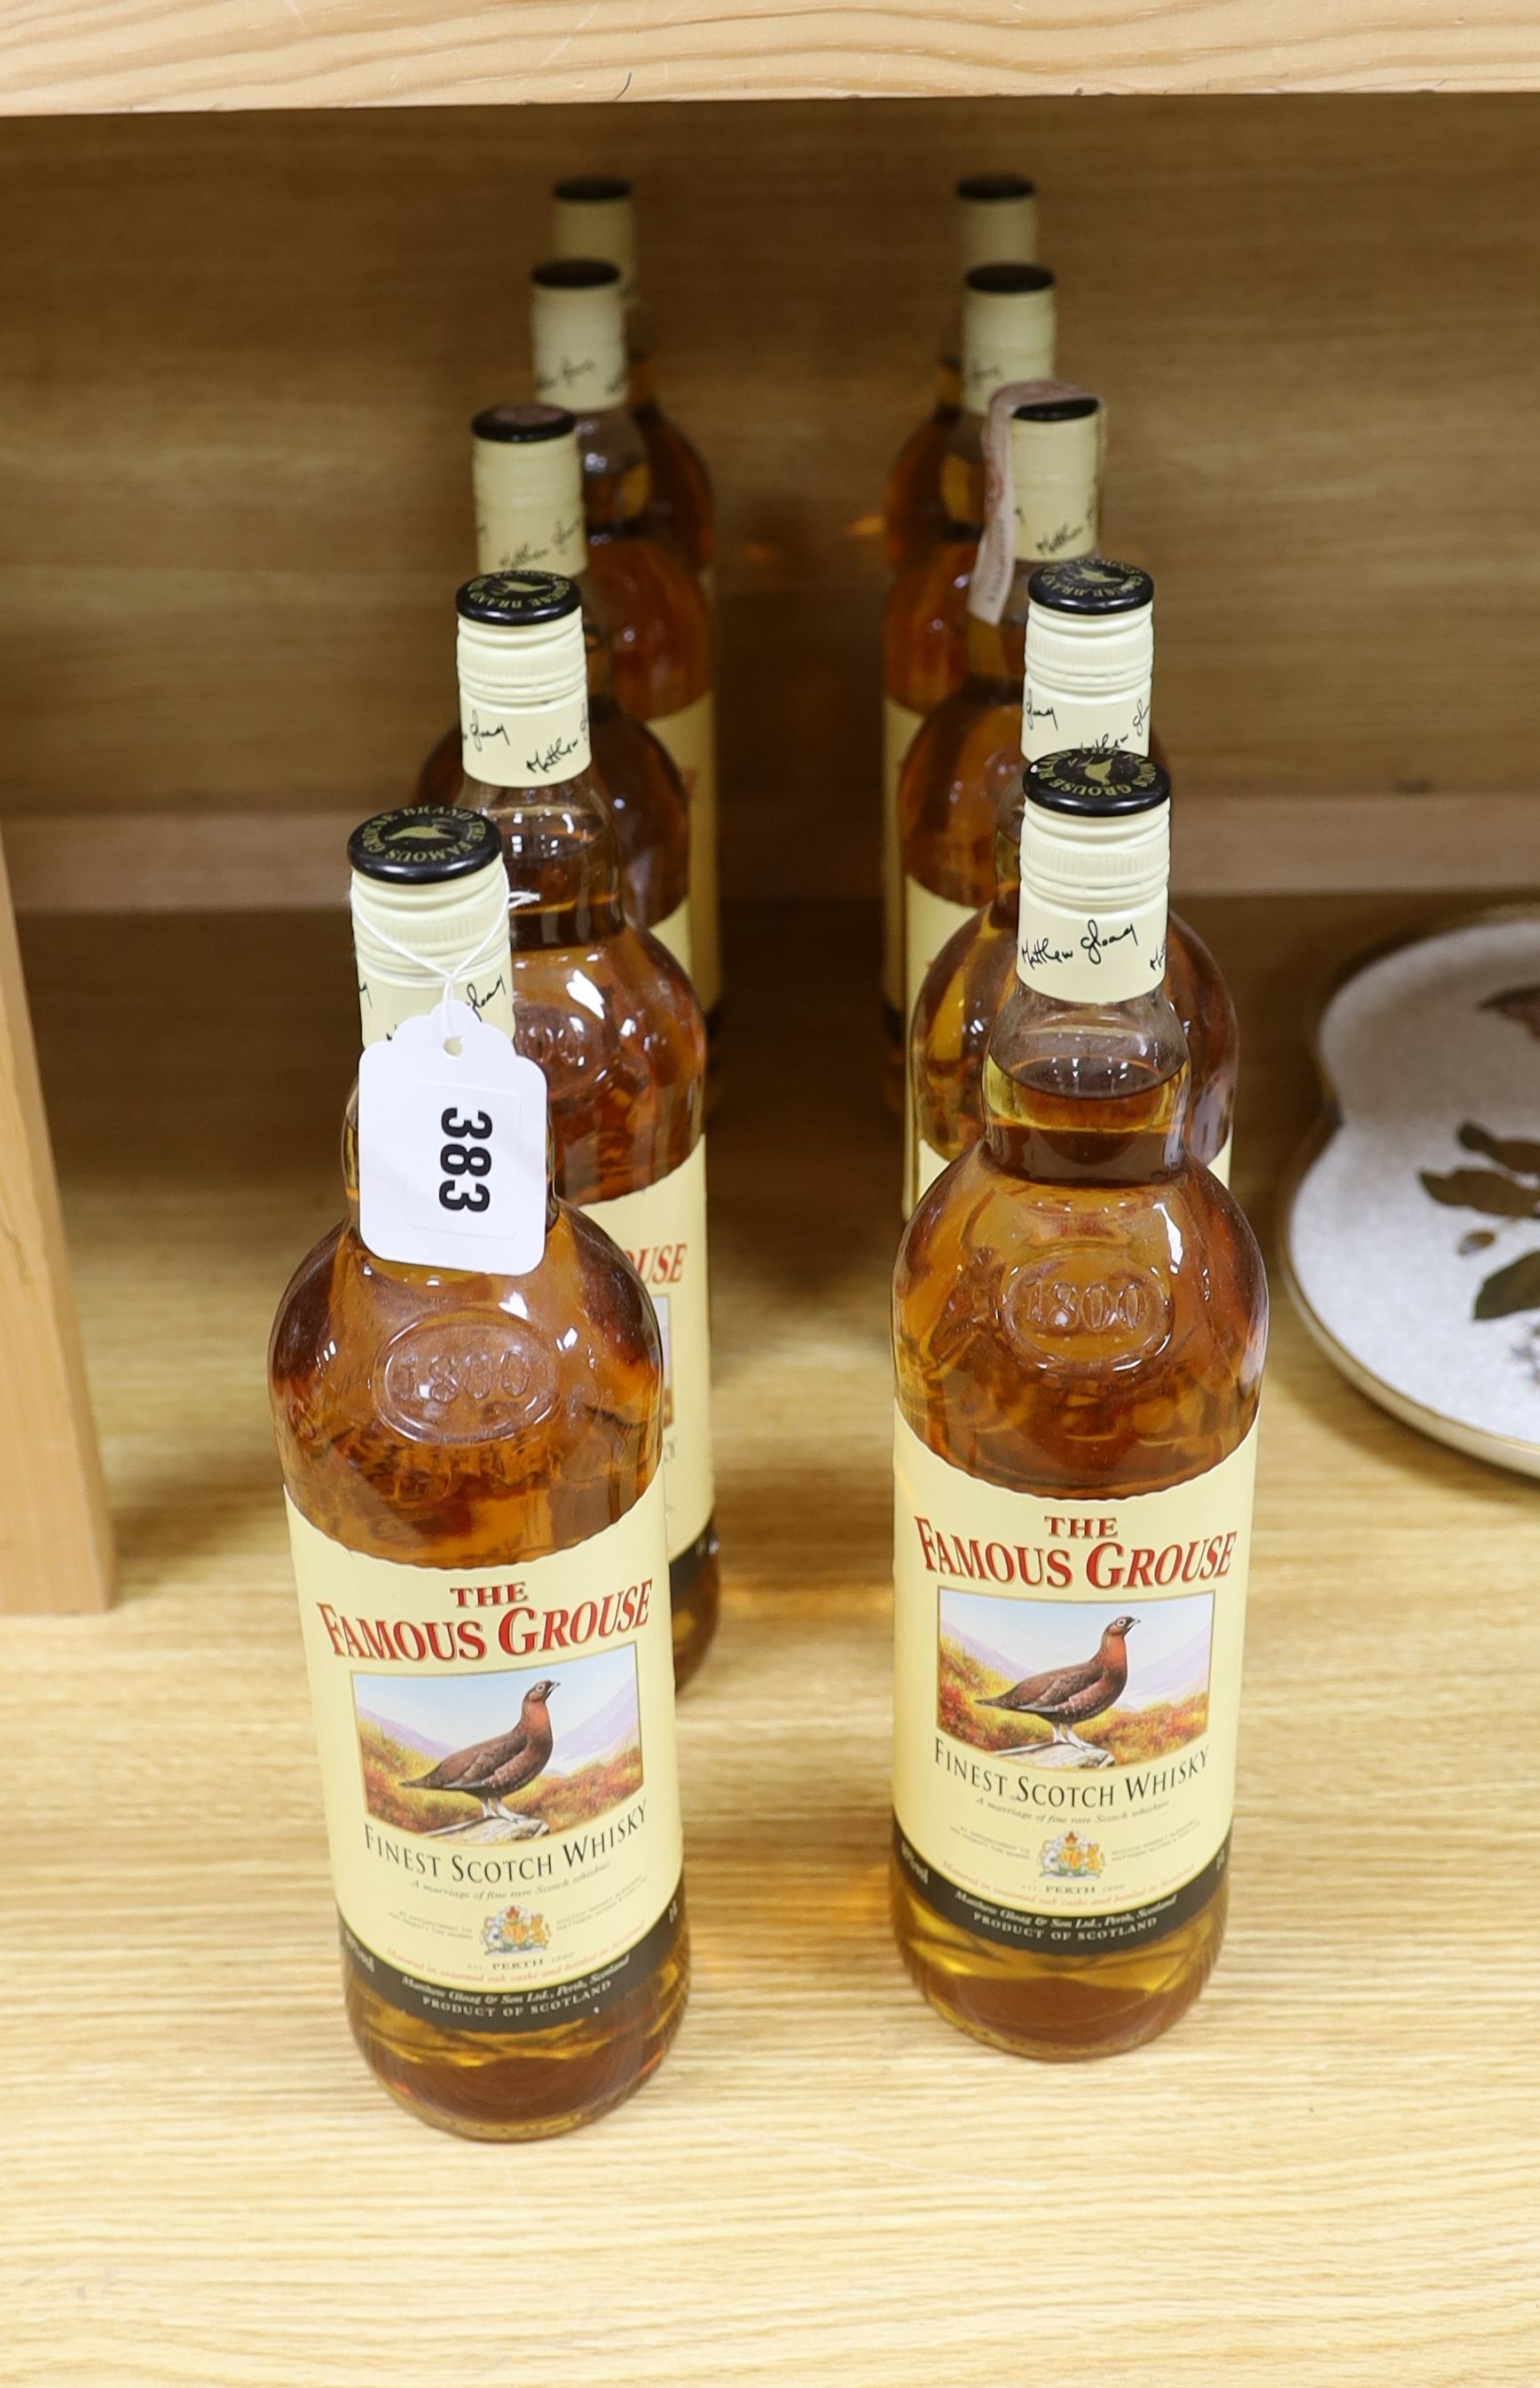 Ten litre bottles of The Famous Grouse Scotch whisky